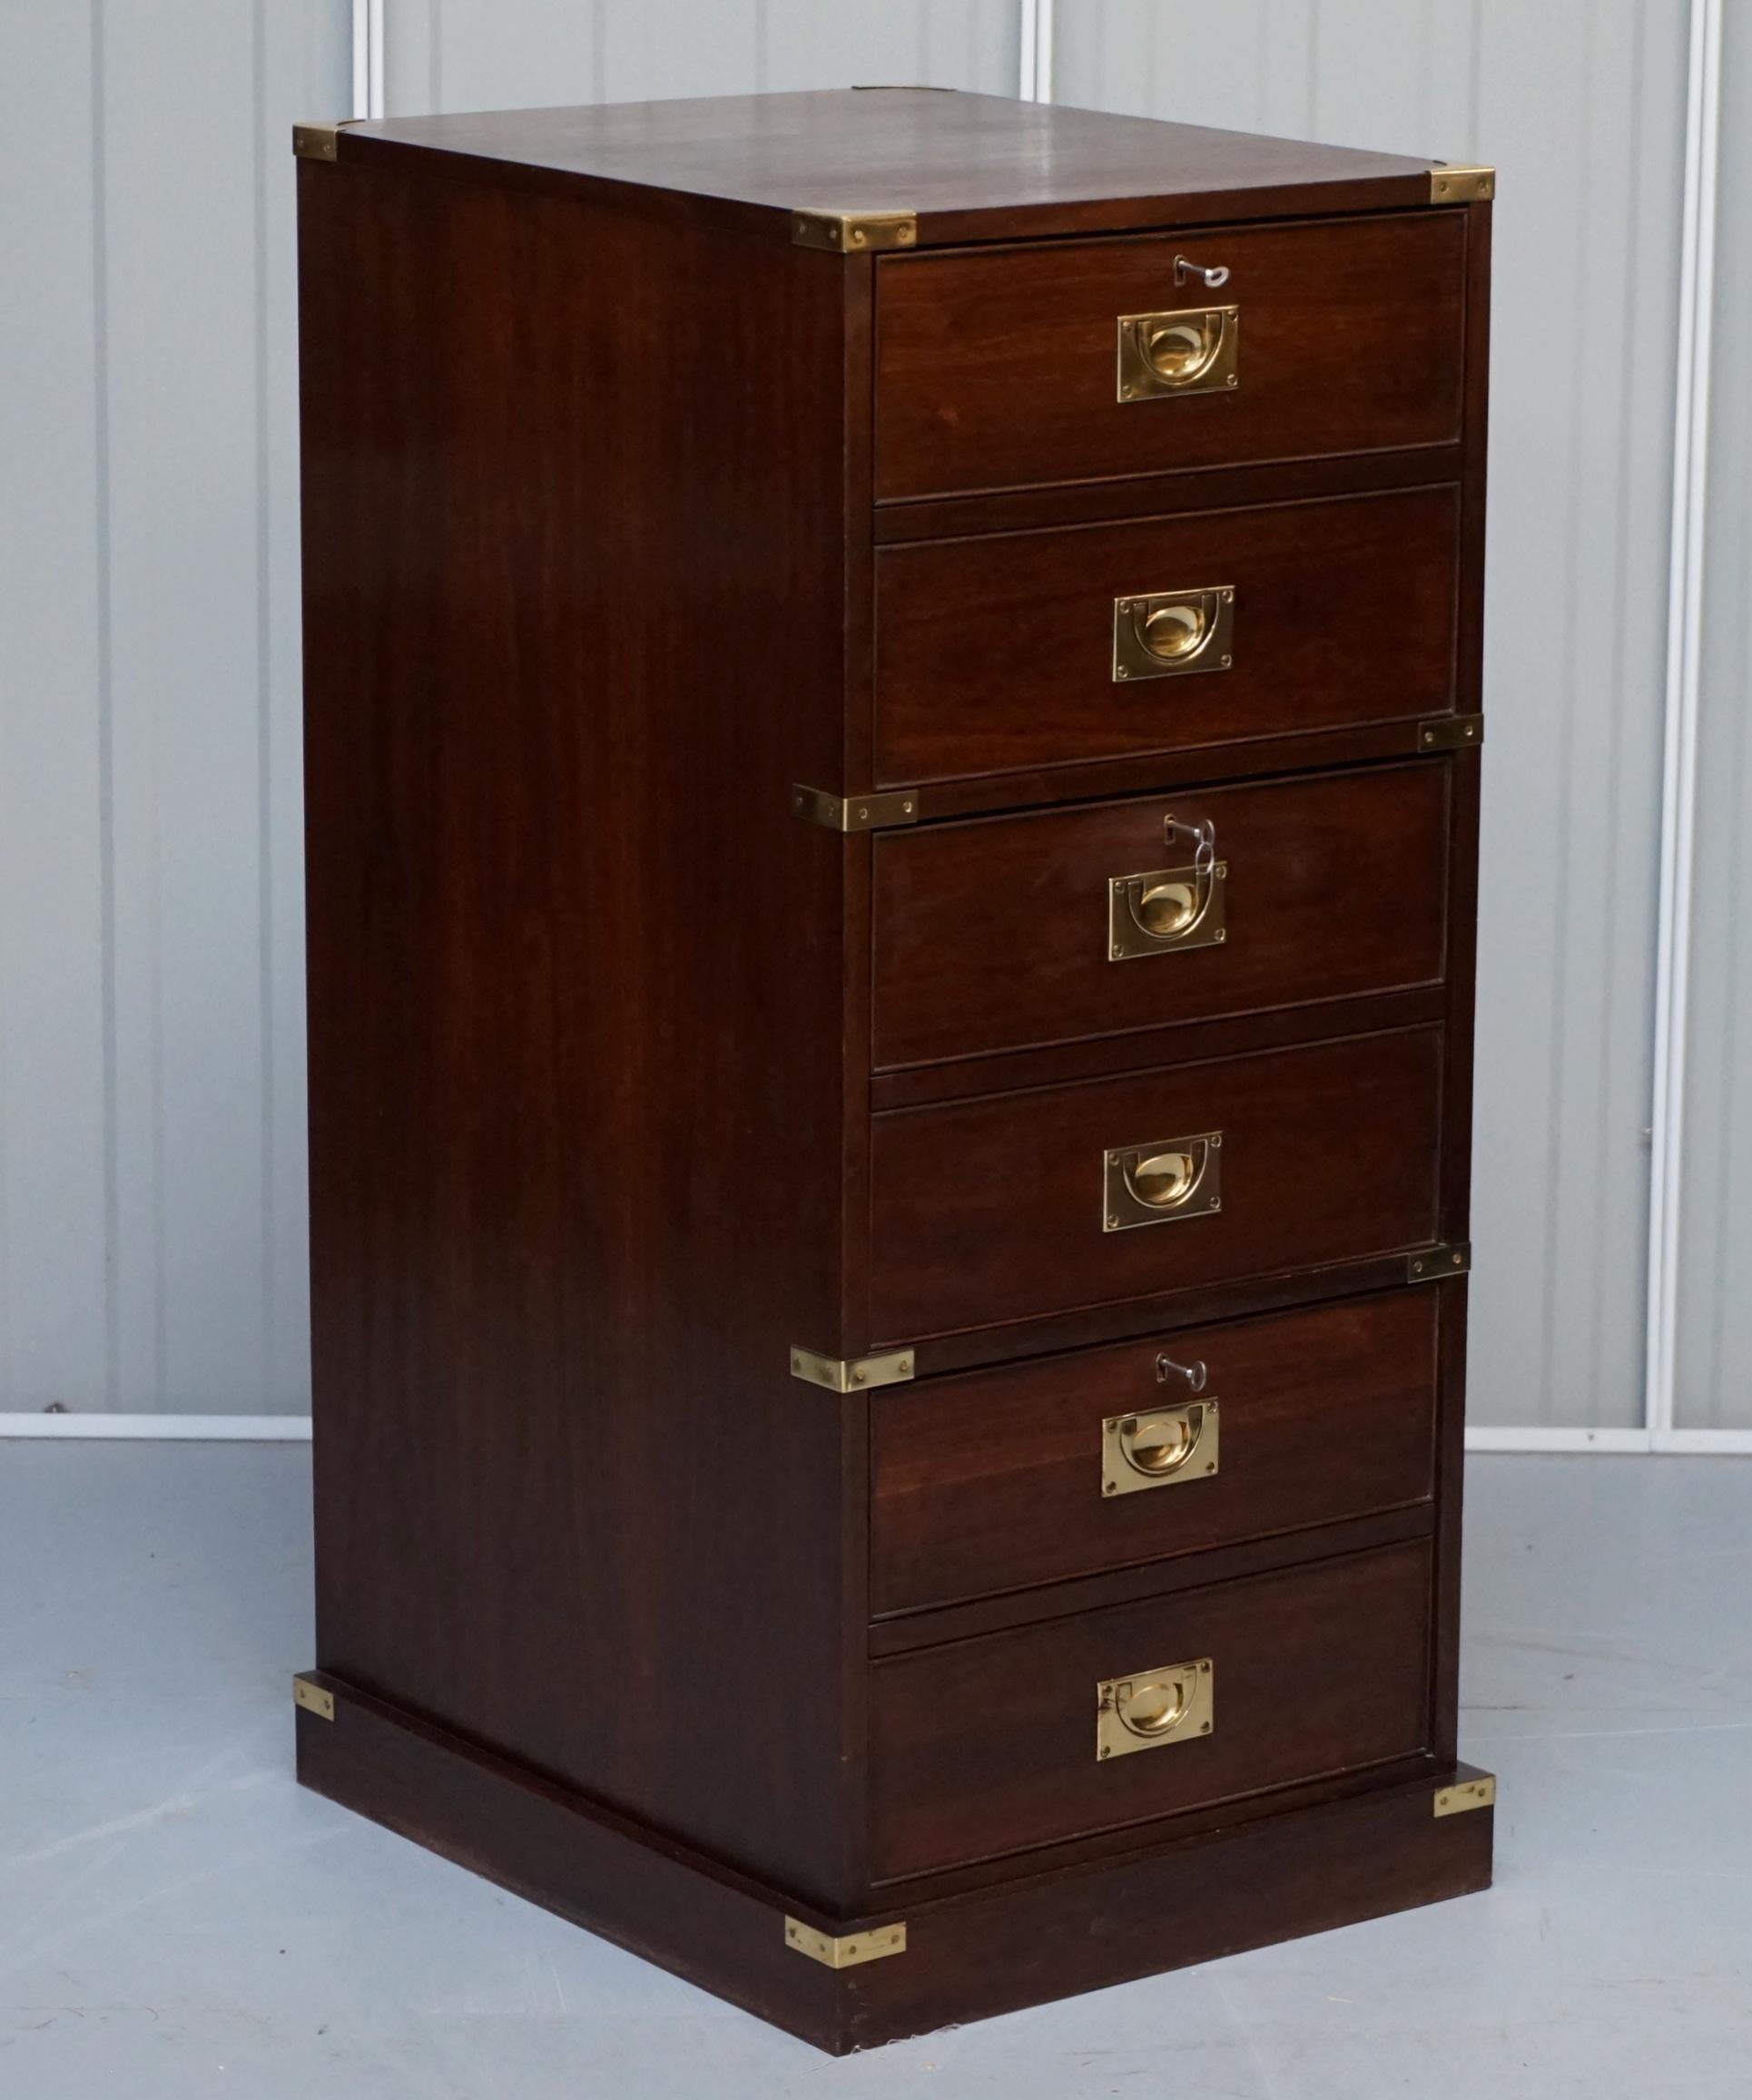 We are delighted to offer for sale this lovely large tall three drawer Military Campaign filing cabinet which is part of a set

I have the matching large double sided desk listed under my other items 

A good looking large and functional piece